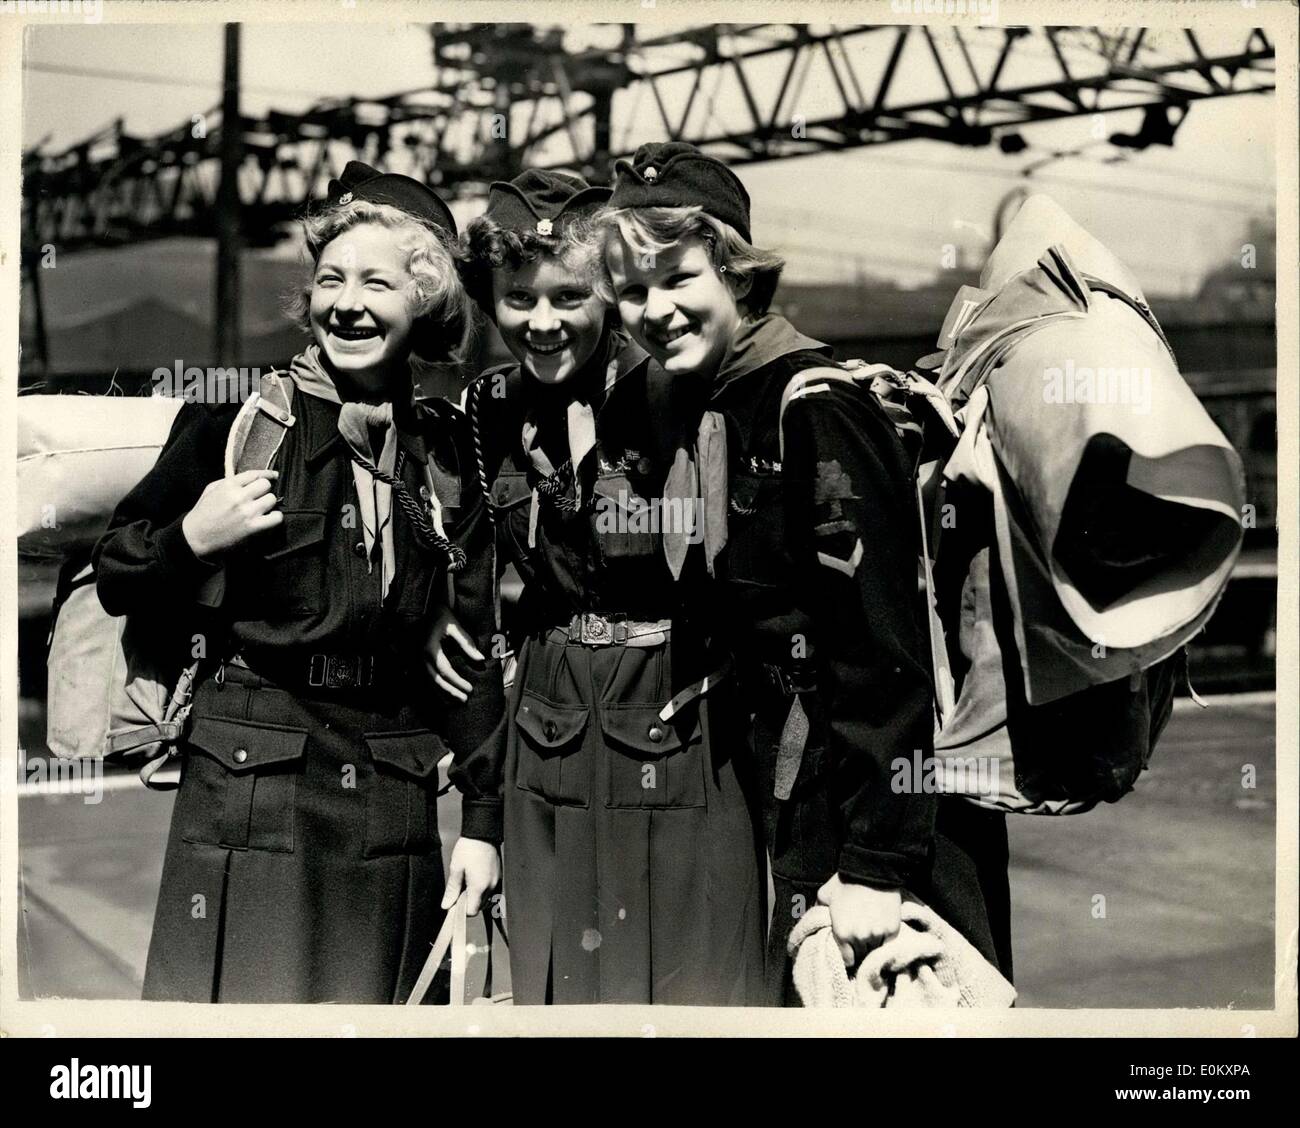 Aug. 08, 1952 - Norwegian Girl Guides Arrive In London For International Camp: A party of Norwegian Girl Guides who have been staying at Ipswich for the past few days - arrived in London this morning on way to the International Guide Camp at Beaconsfield. Photo shows L-R:- Astri Perring (17) of Oslo; Astrid Jacobsen (16), Oslo and Ase Guterdrum, Oslo - seen with their packs at Liverpool Street Station this morning. Stock Photo